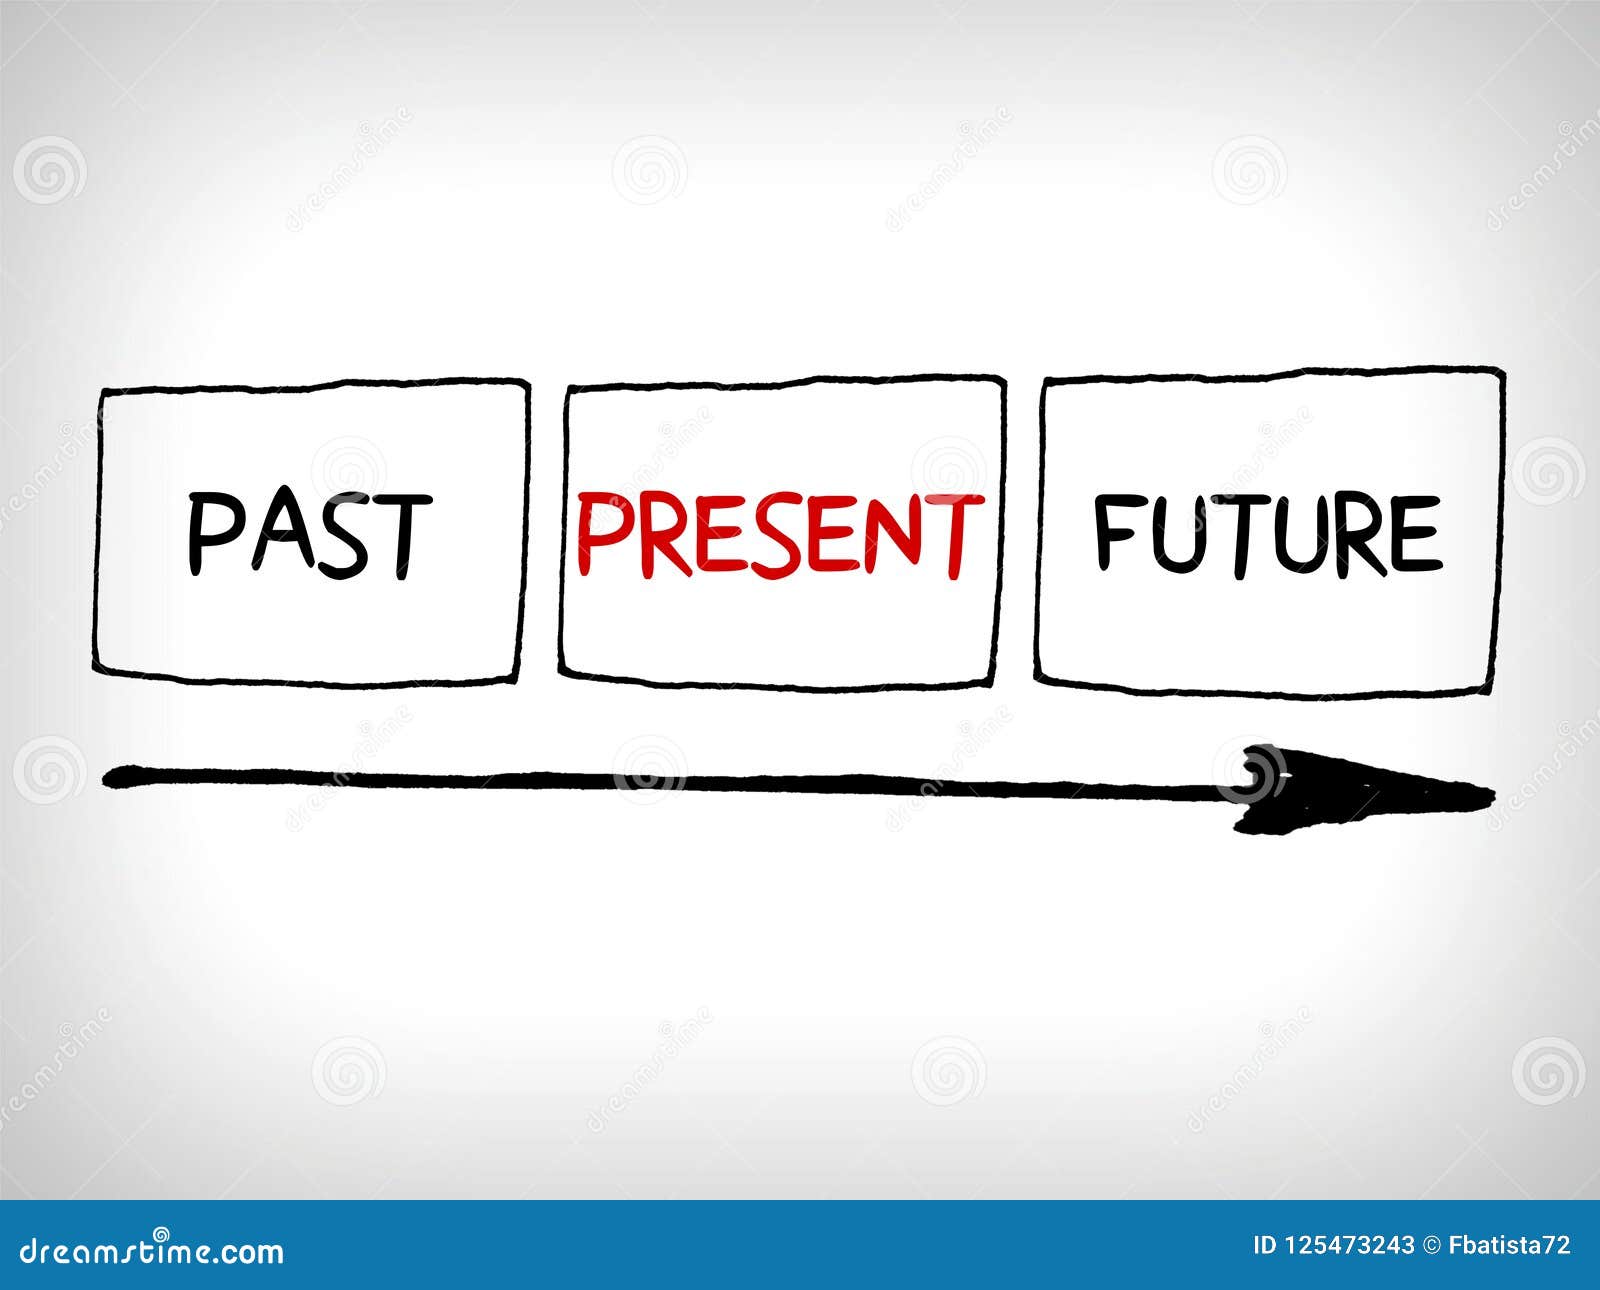 Words Past, Present and Future Concept with Arrows Stock Illustration